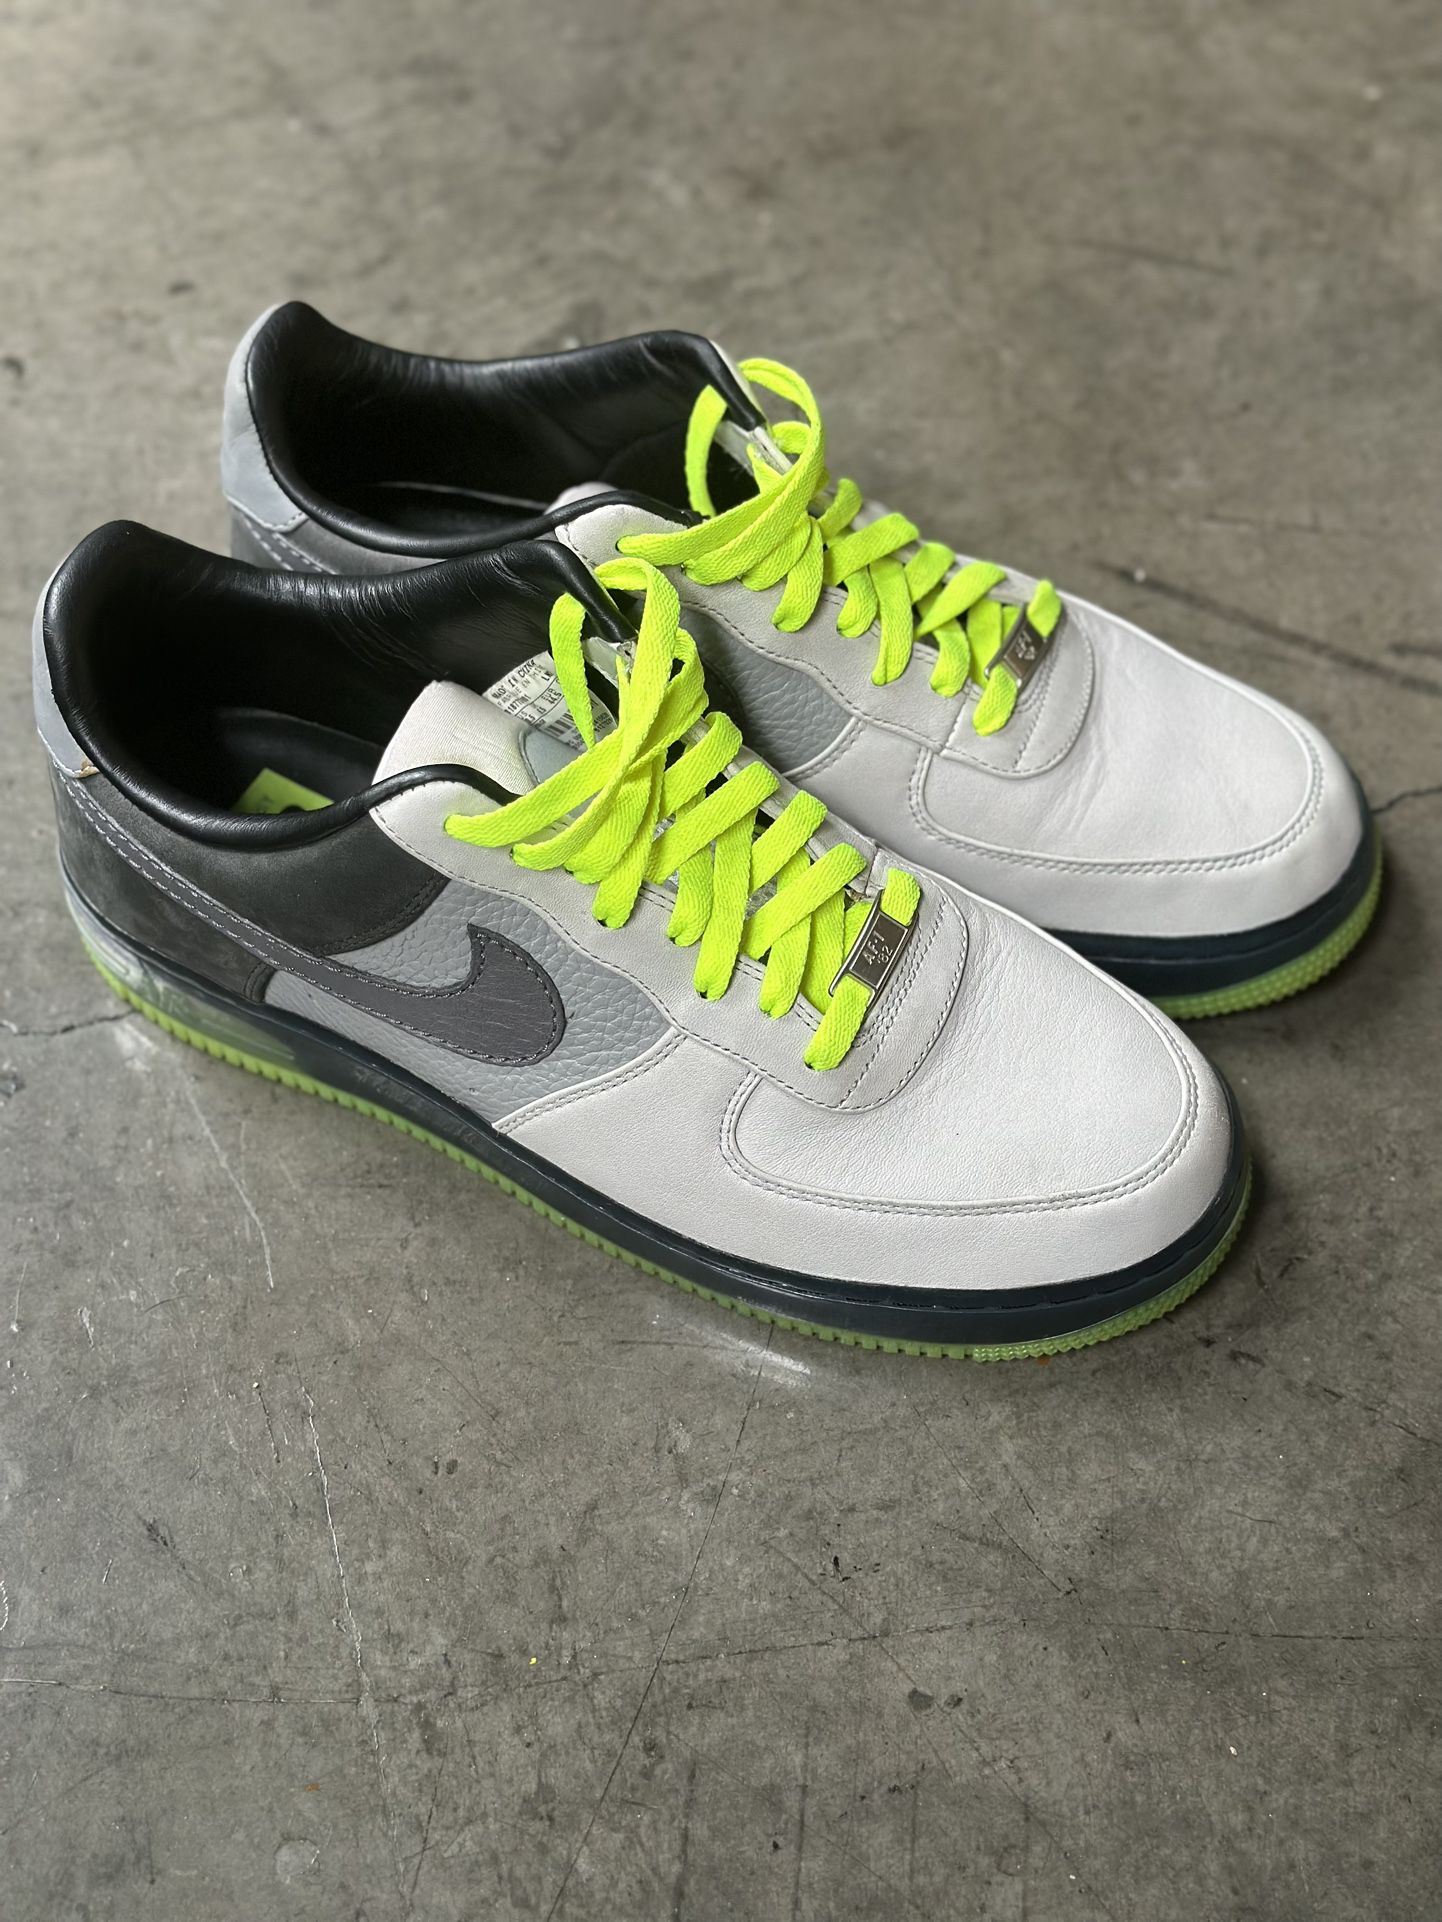 Nike Air Force 1 Low Air Max 95 for Sale in Los Angeles, CA - OfferUp